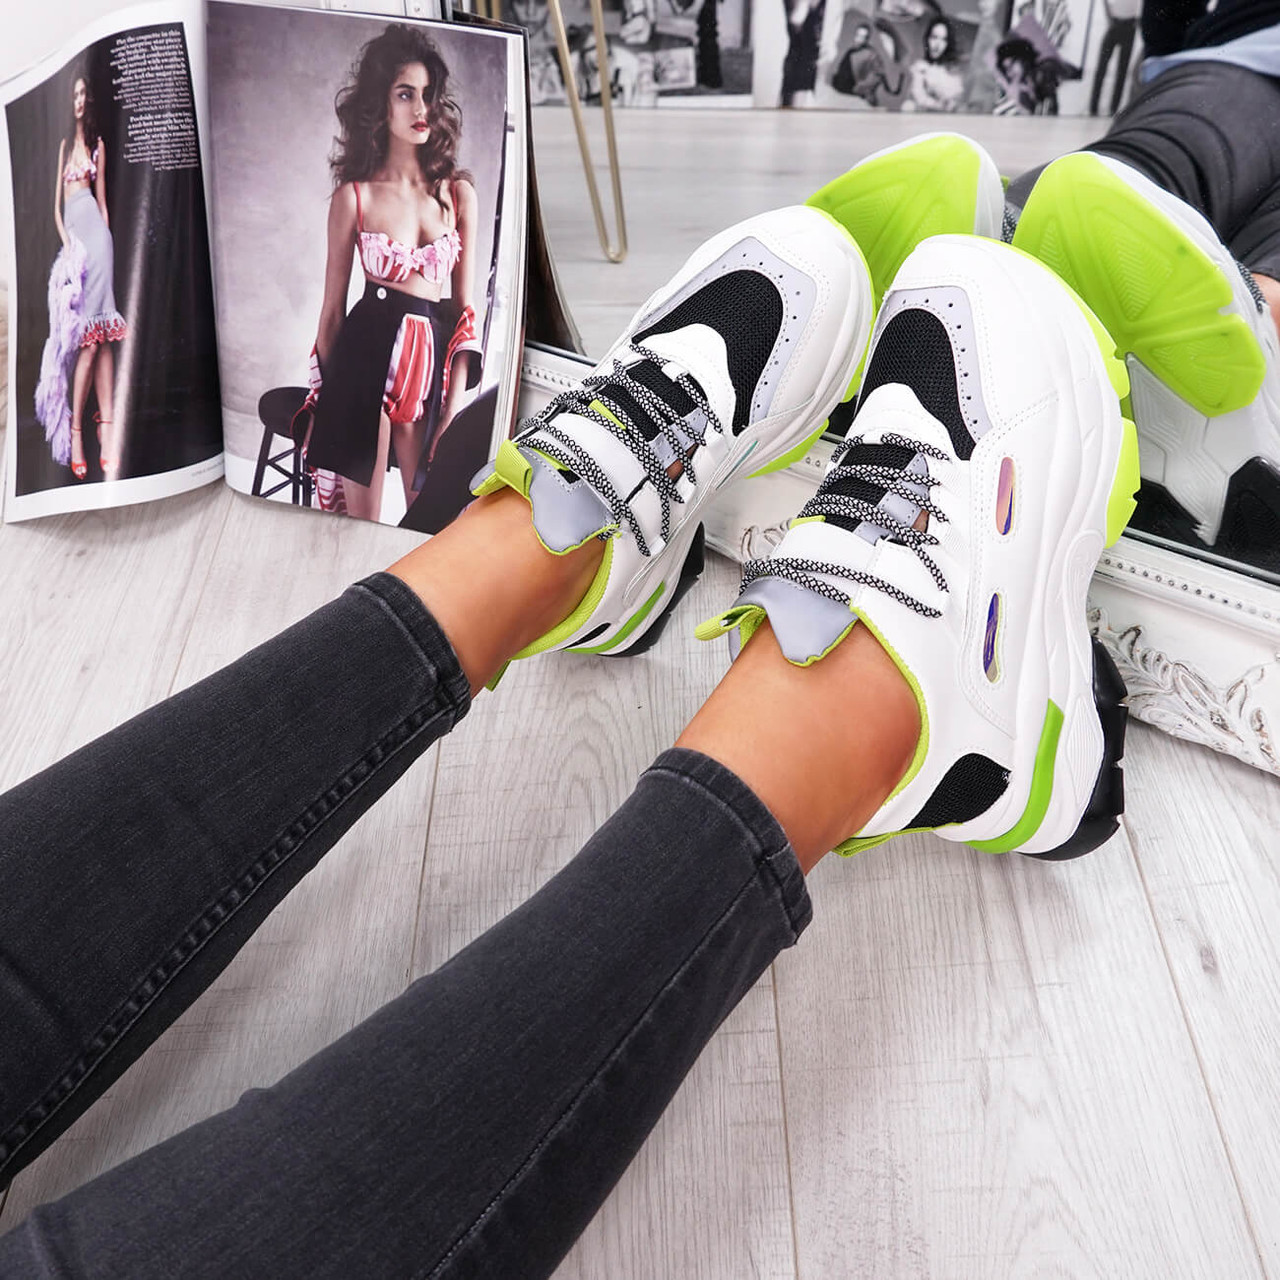 white lace up chunky trainer